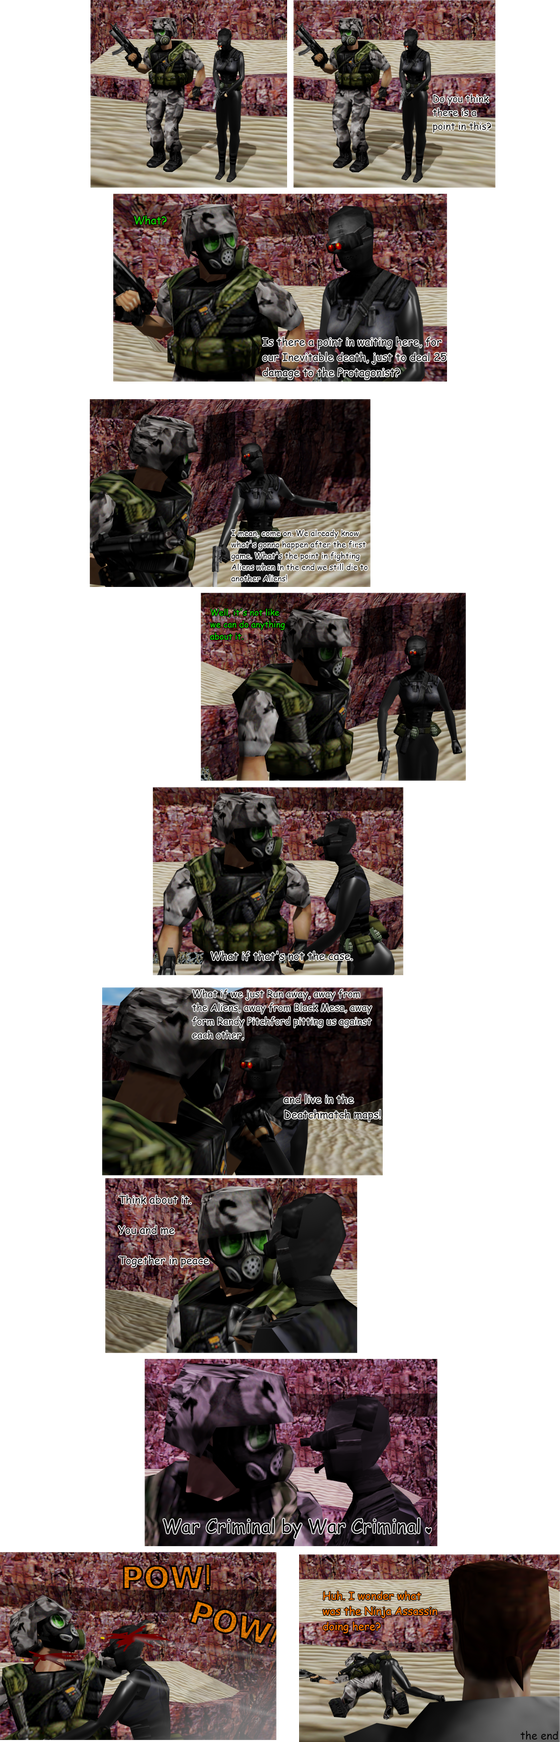 I Made this Comic. Inspired by the hl2 comics

just a random ai hgrunt and hassassin love story